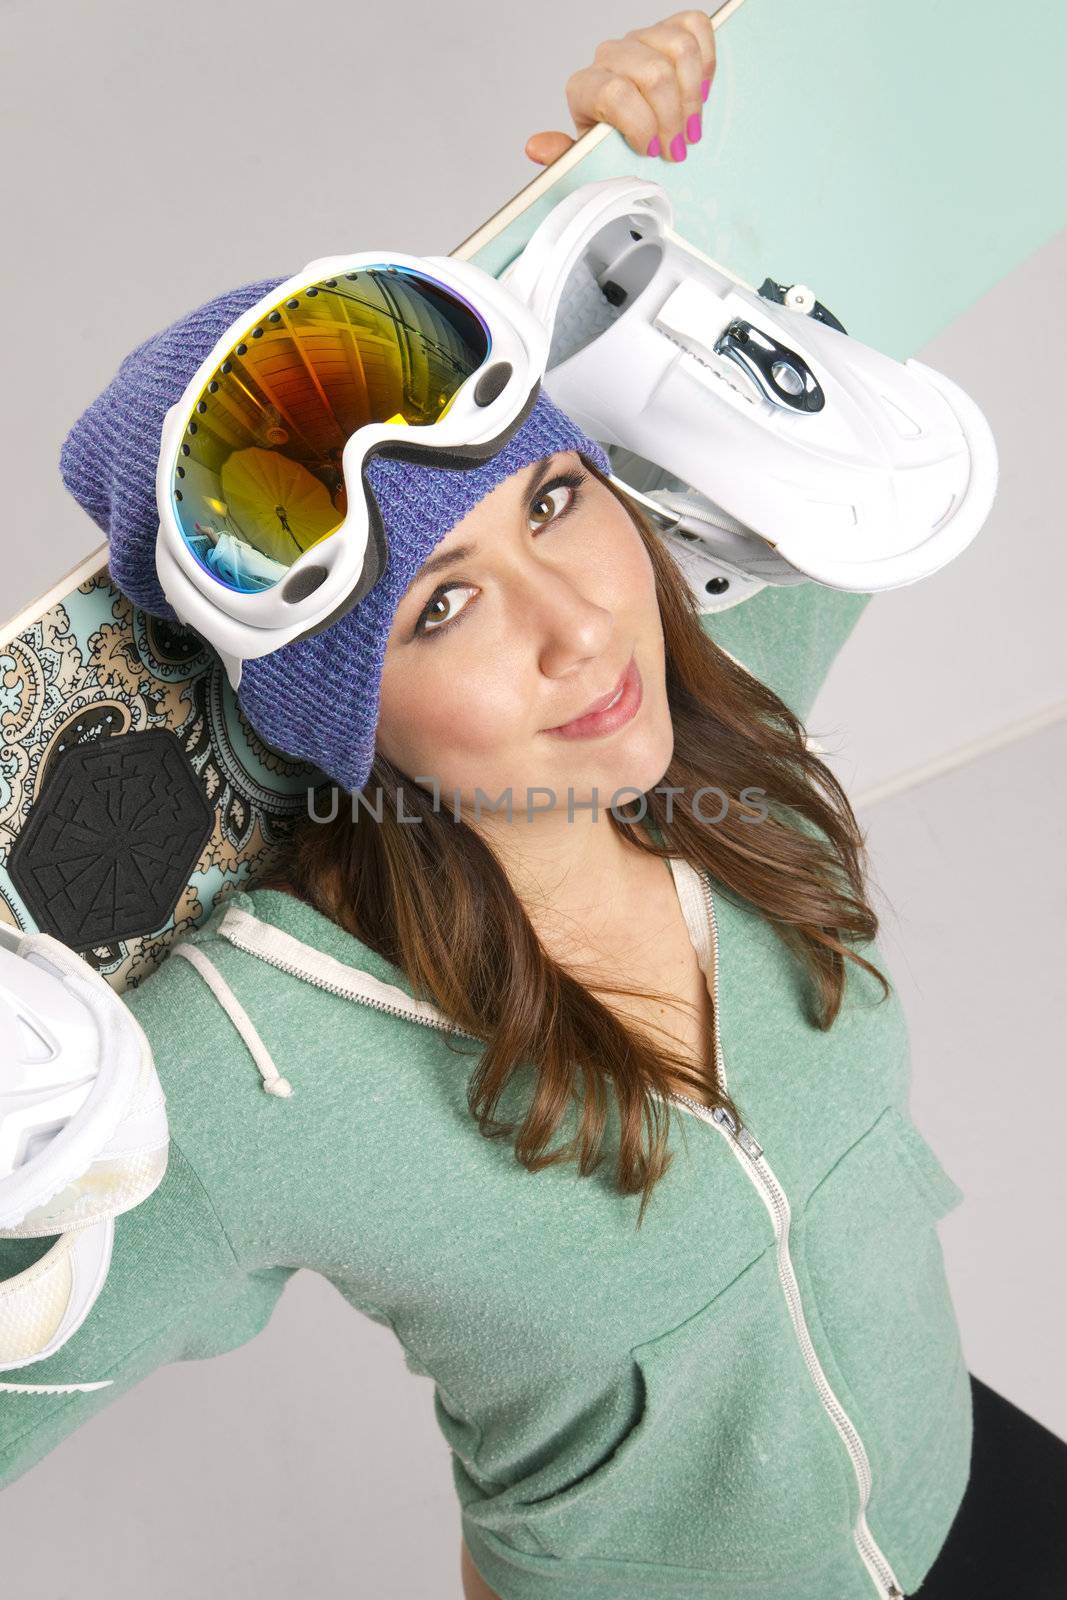 Snowboard and Fun Loving Female in Teal by ChrisBoswell